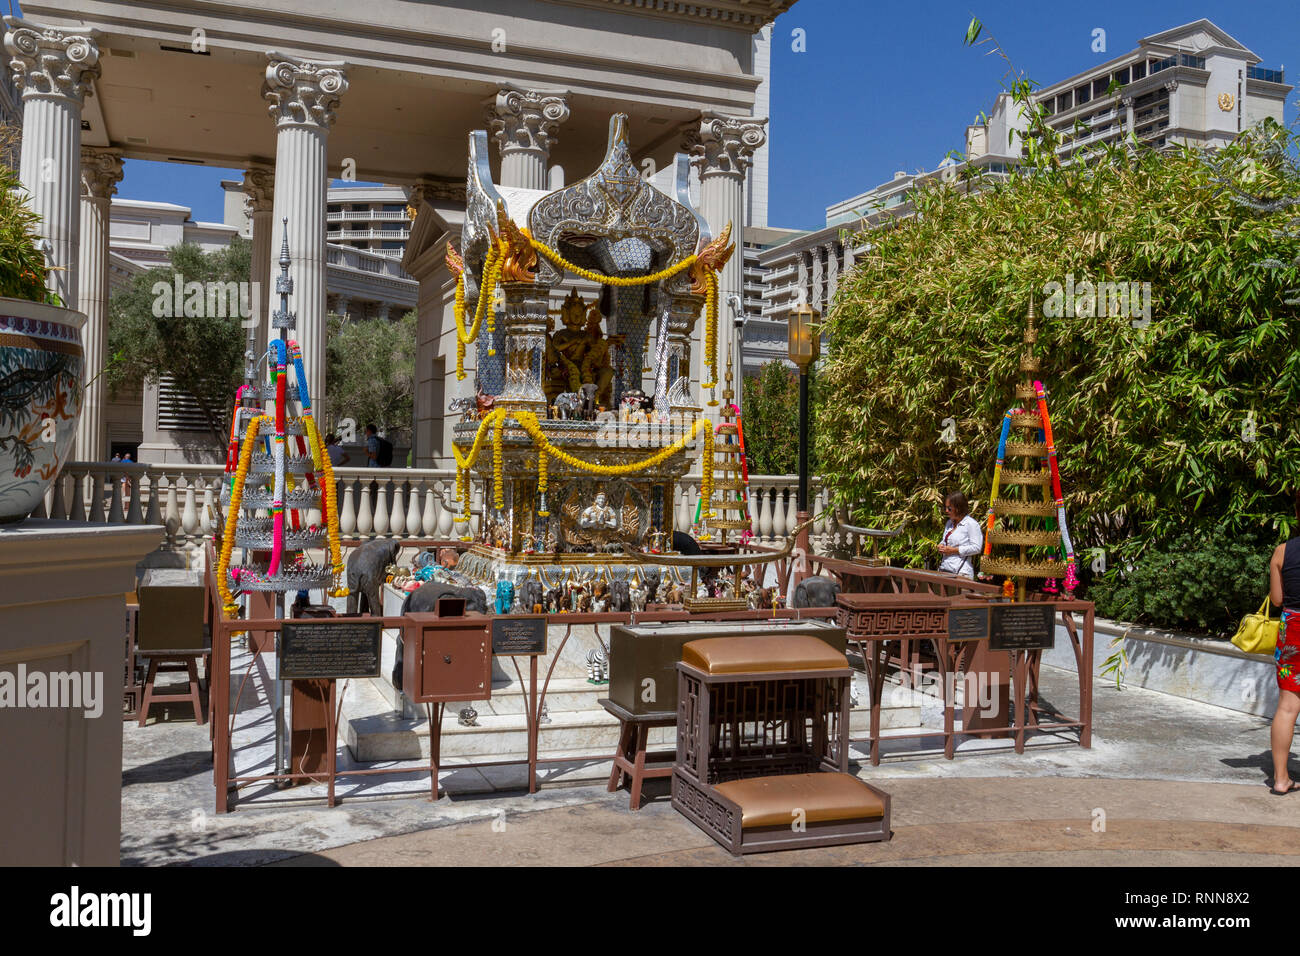 The Shrine Of Four-Faced Brahma in the grounds of the Caesars Palace hotel and casino, on The Strip, Las Vegas, Nevada, United States. Stock Photo